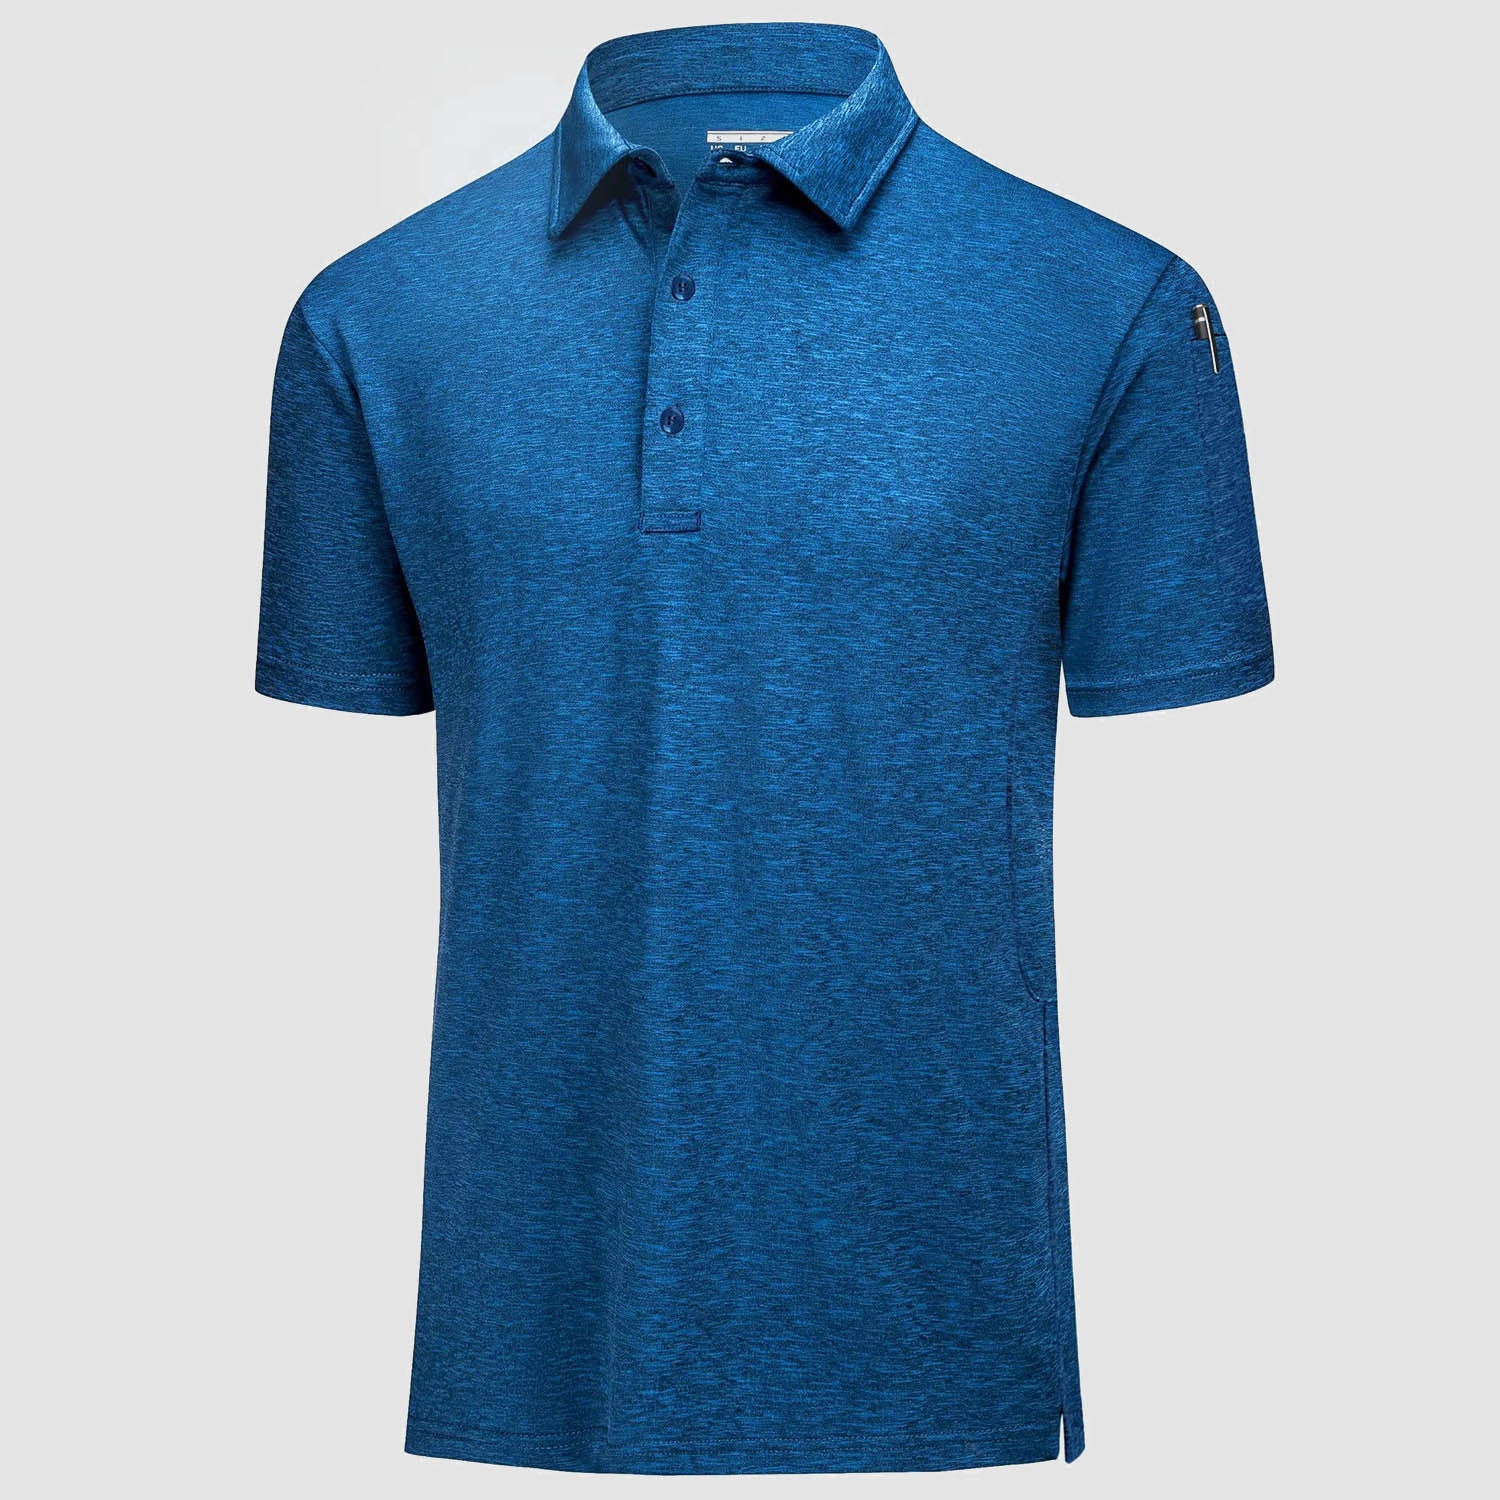 Men's Breathable T-shirt Quick Dry Golf Polo